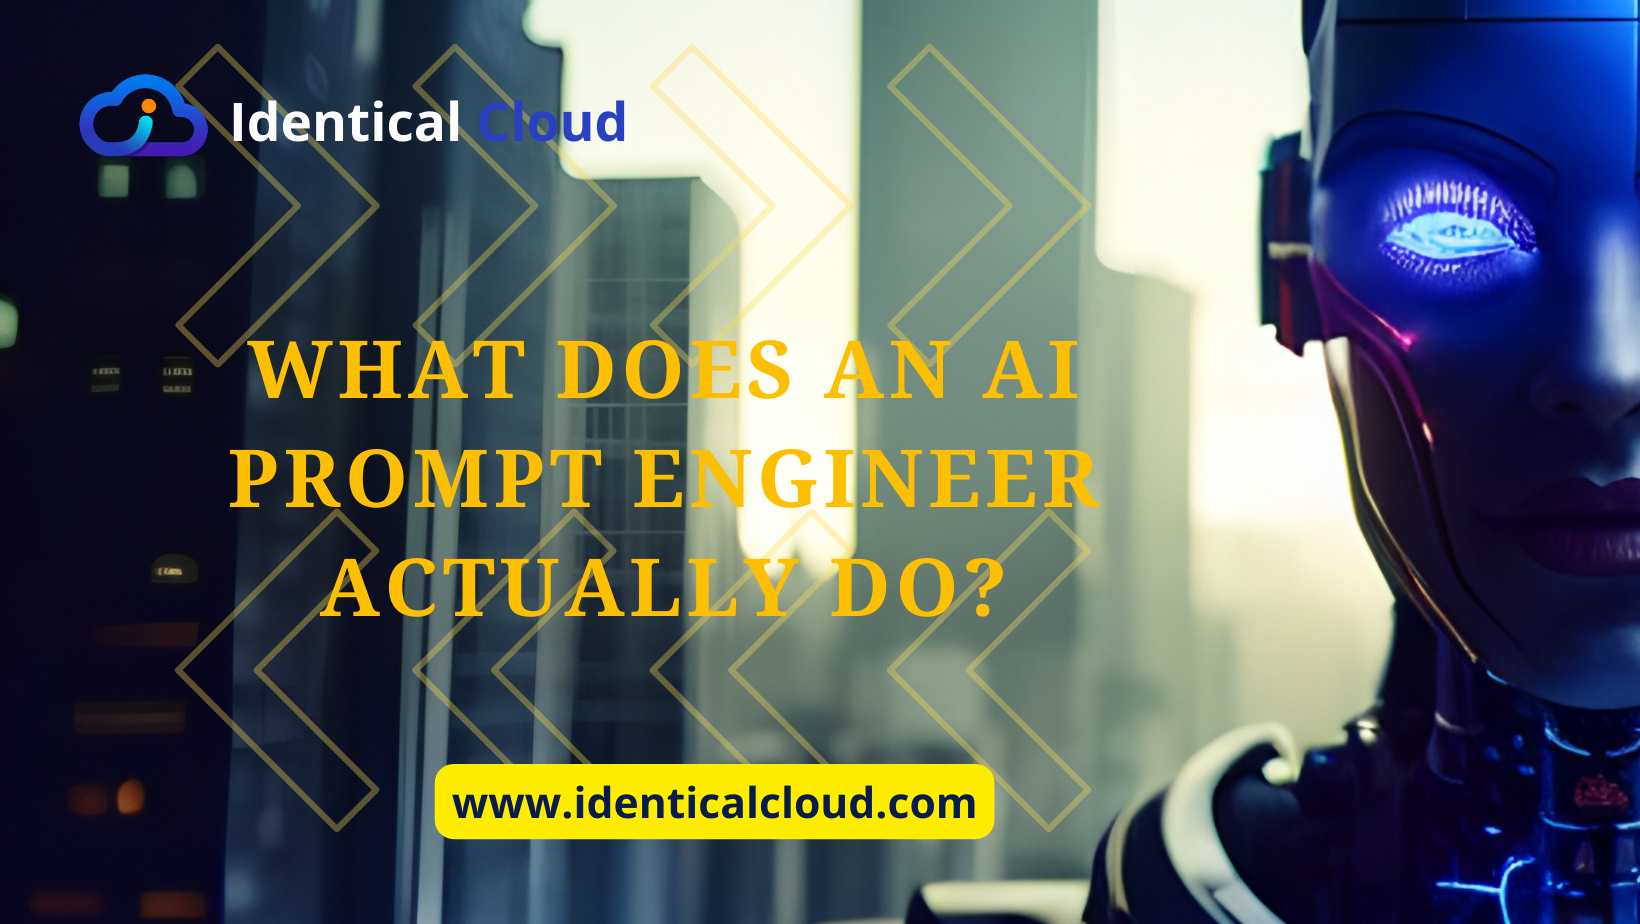 What Does an AI Prompt Engineer Actually Do? - identicalcloud.com